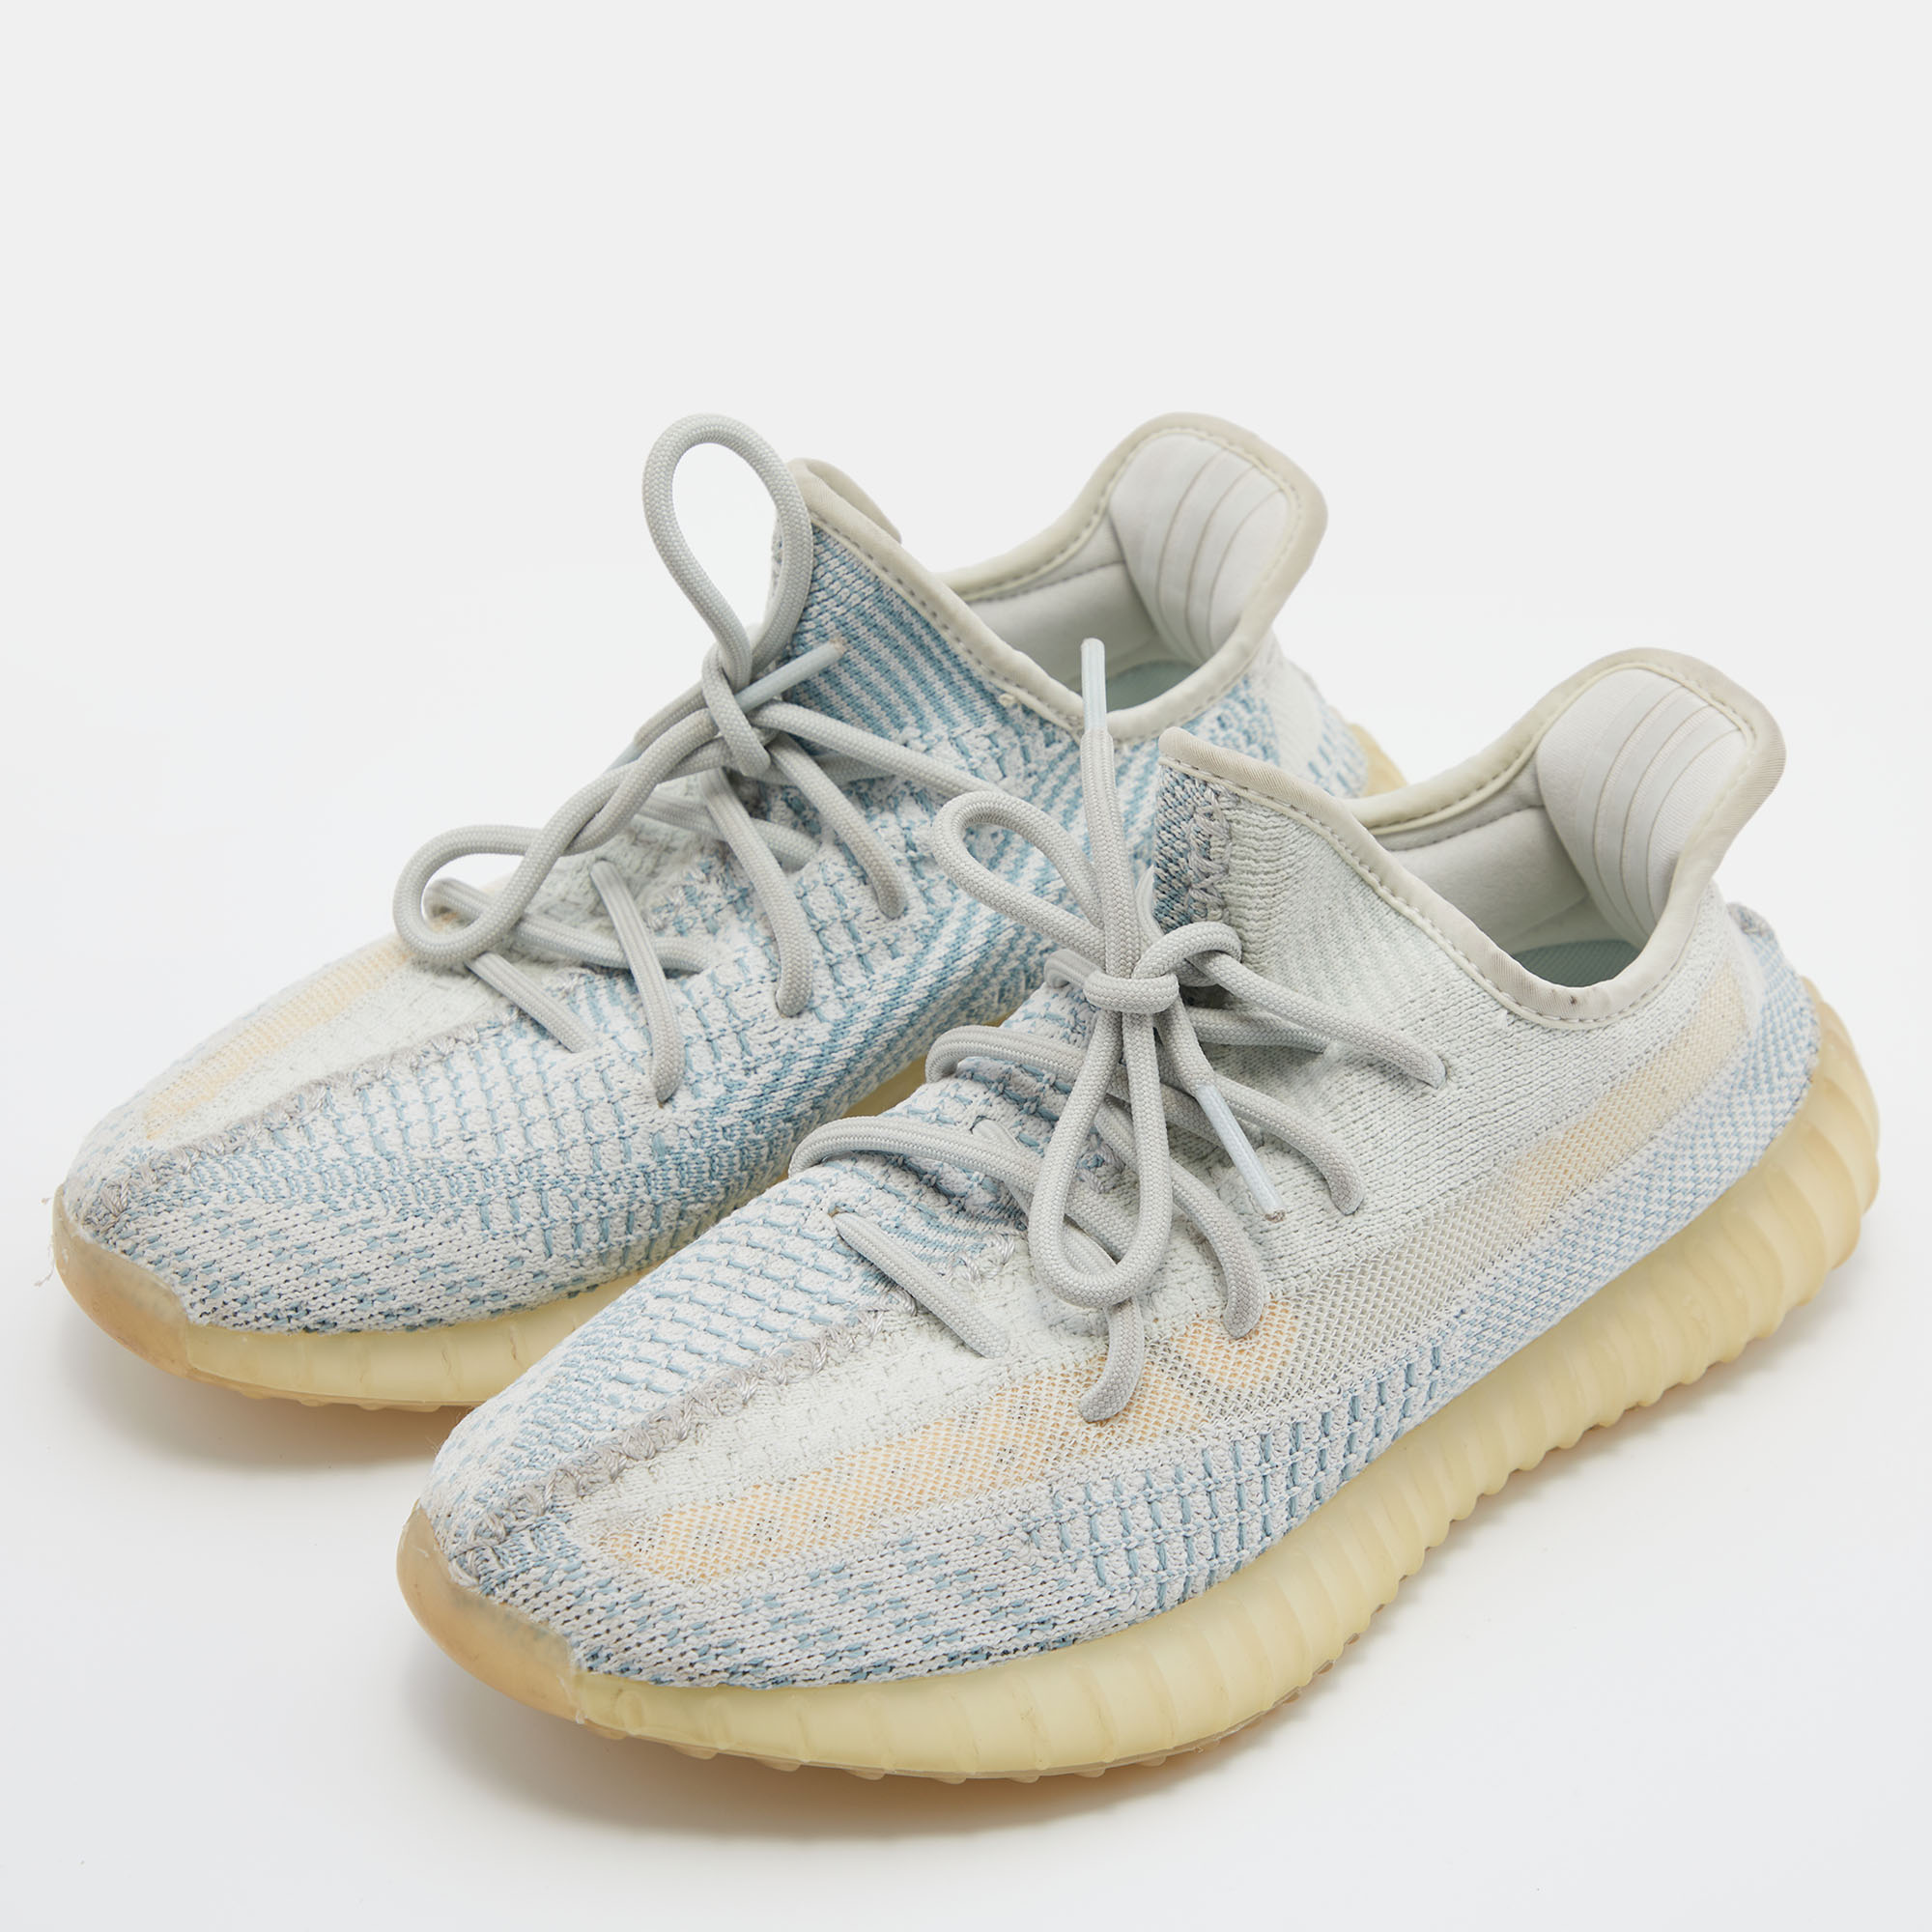 

Adidas Yeezy Green Knit Fabric Boost 350 V2 Cloud (Non-Reflective) Sneakers Size 40 2/3